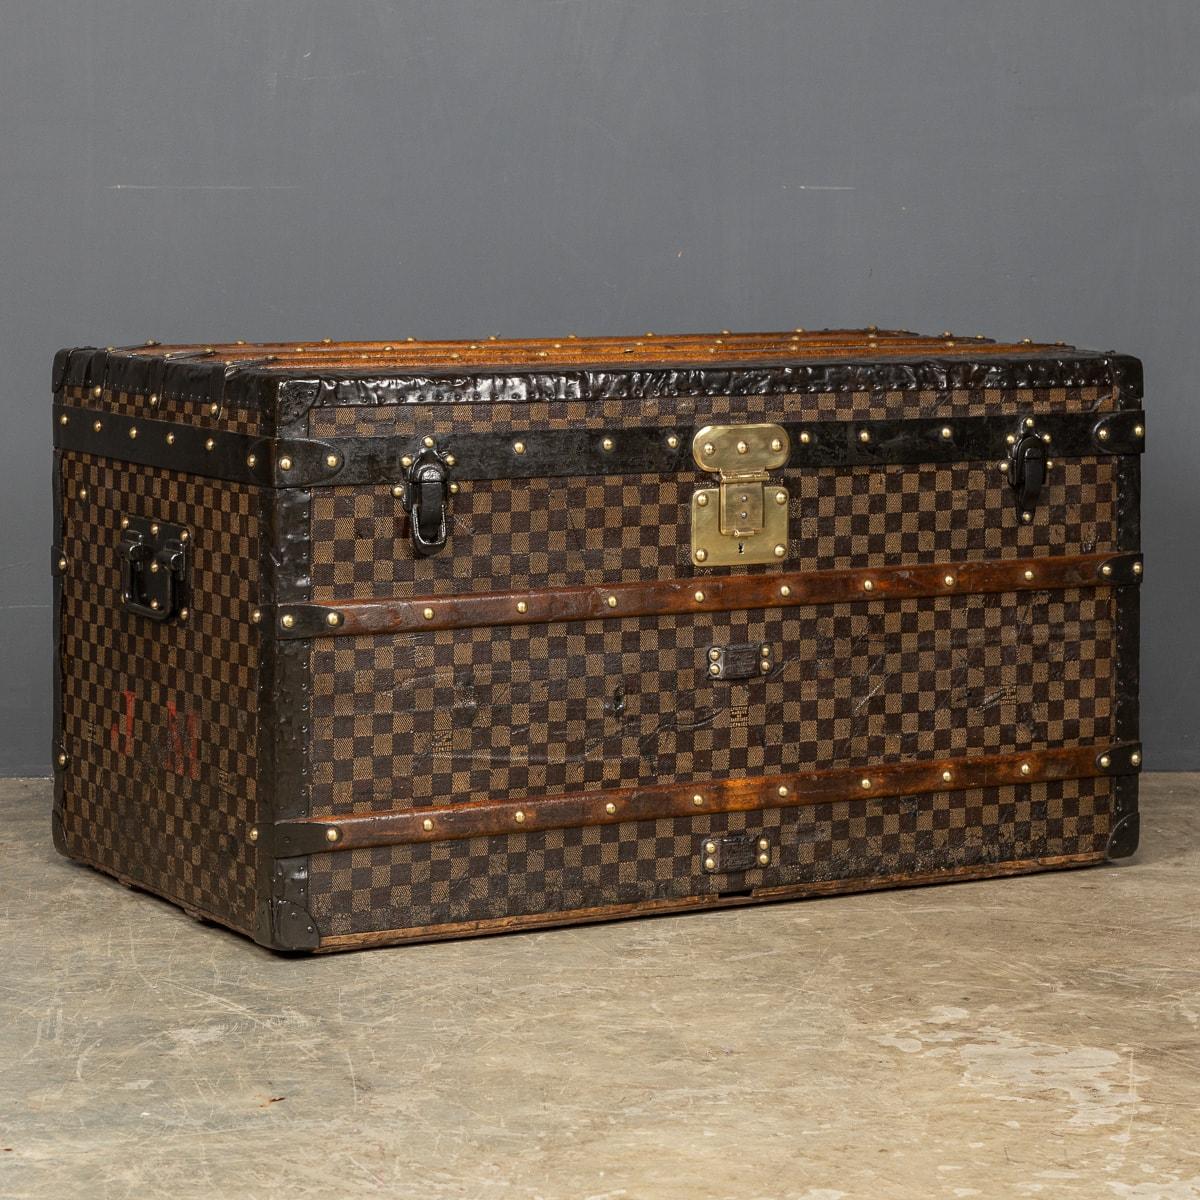 Antique 19th Century large Louis Vuitton Trunk in the traditional checkerboard canvas with red striped lining and two original trays. This trunk has metal edging and handles and a brass lock, c.1890. Around the turn of the 19th and 20th century